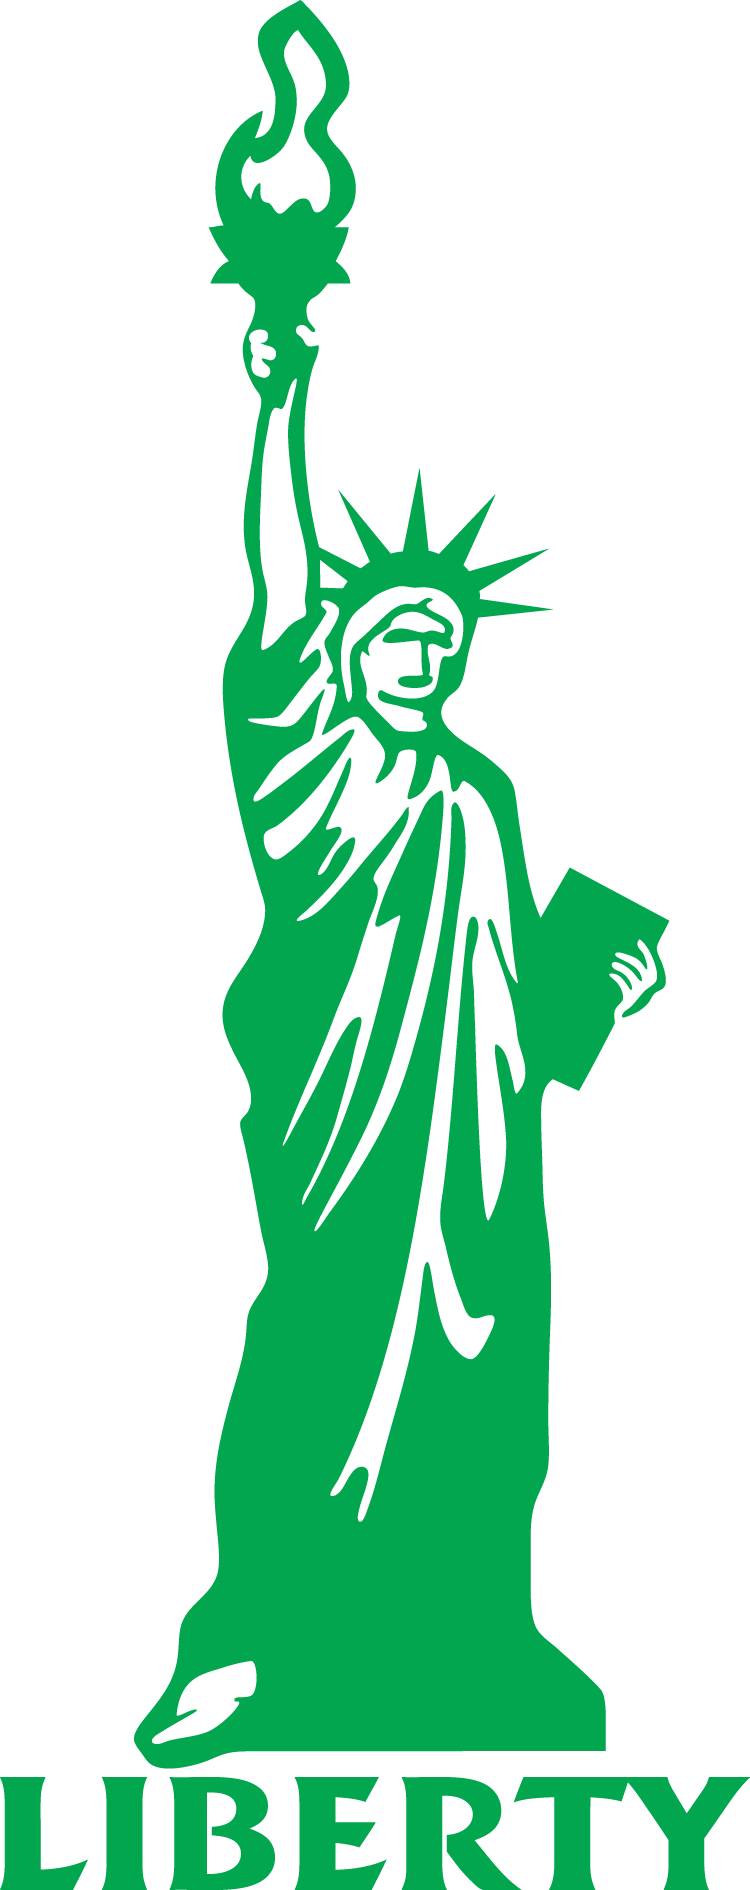 Statue of Liberty (NY2) [NY2] - $4.99 : Eyecandy Decals, Online 